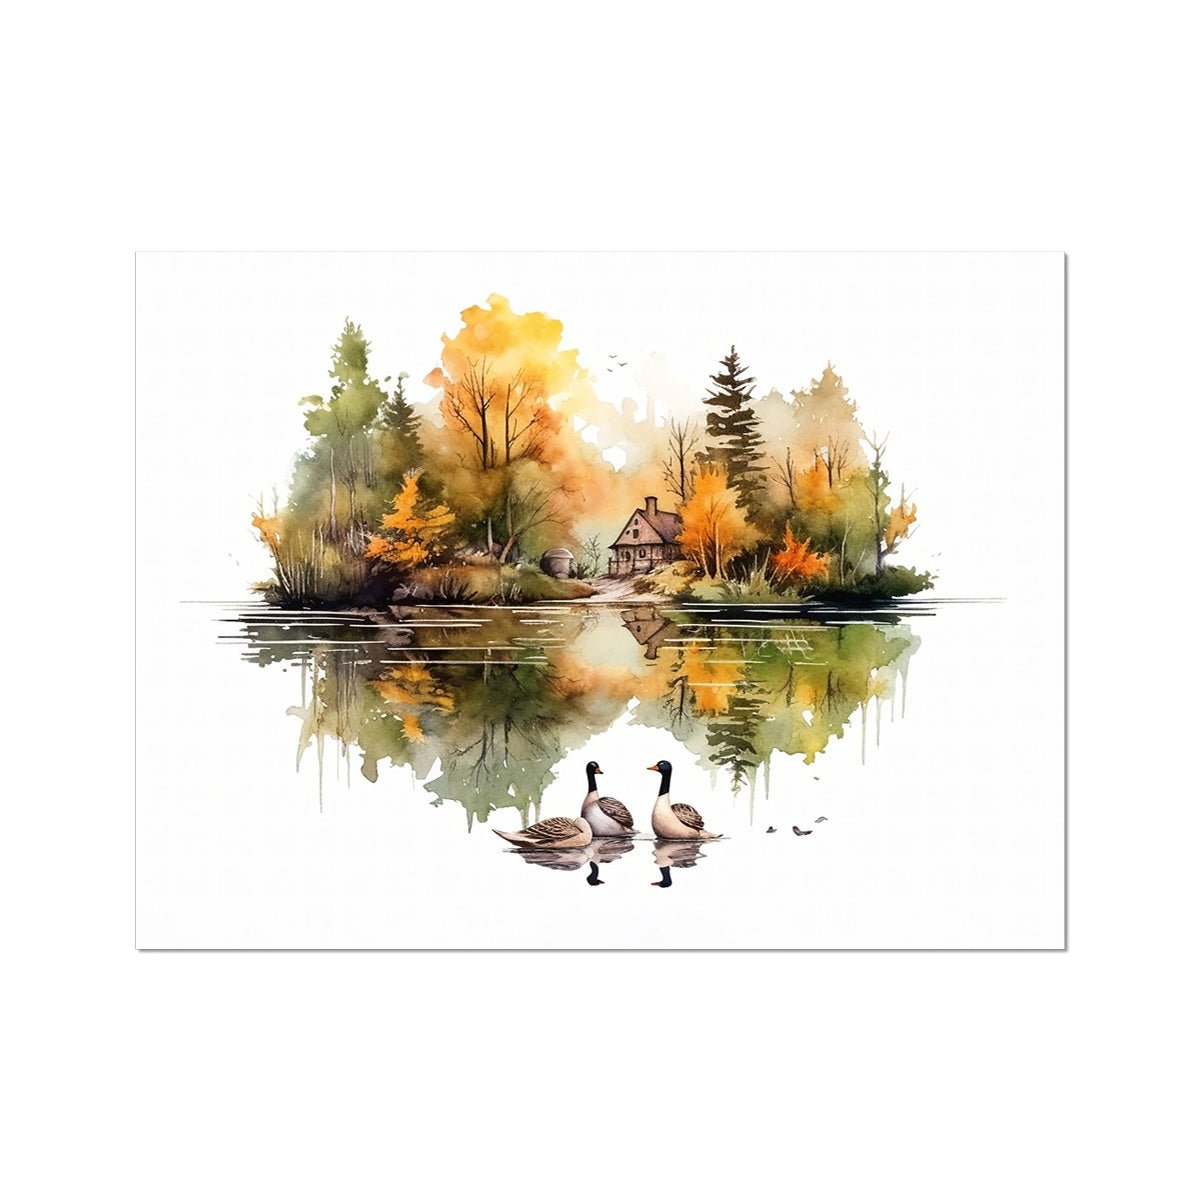 Nature's Serenity - Cozy Forest 4 6 - Landscapes Poster Print by doingly